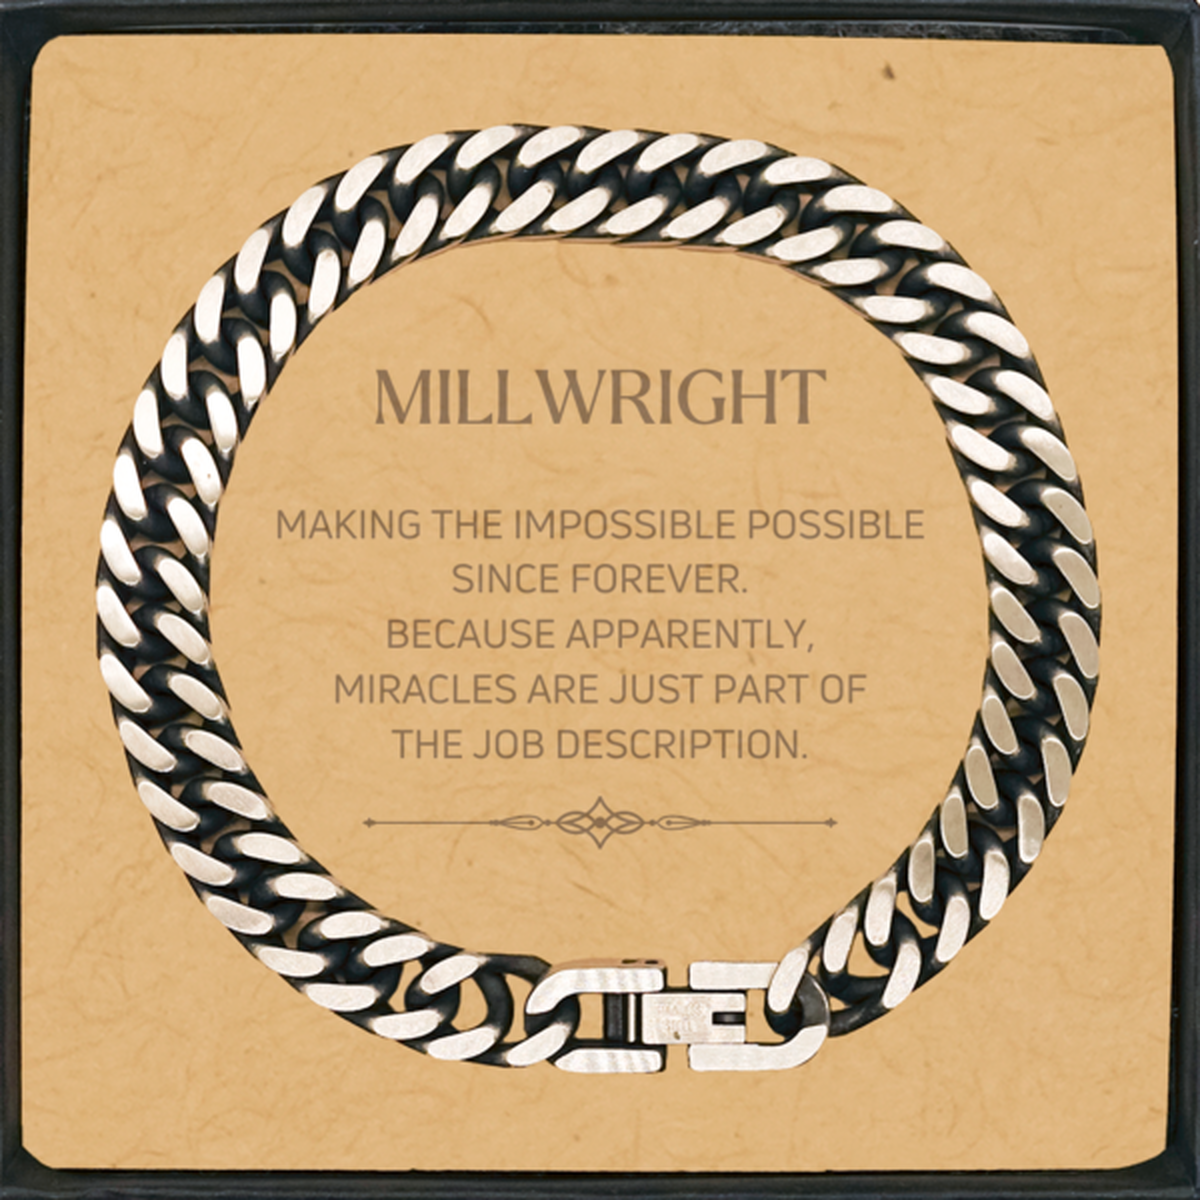 Funny Millwright Gifts, Miracles are just part of the job description, Inspirational Birthday Cuban Link Chain Bracelet For Millwright, Men, Women, Coworkers, Friends, Boss